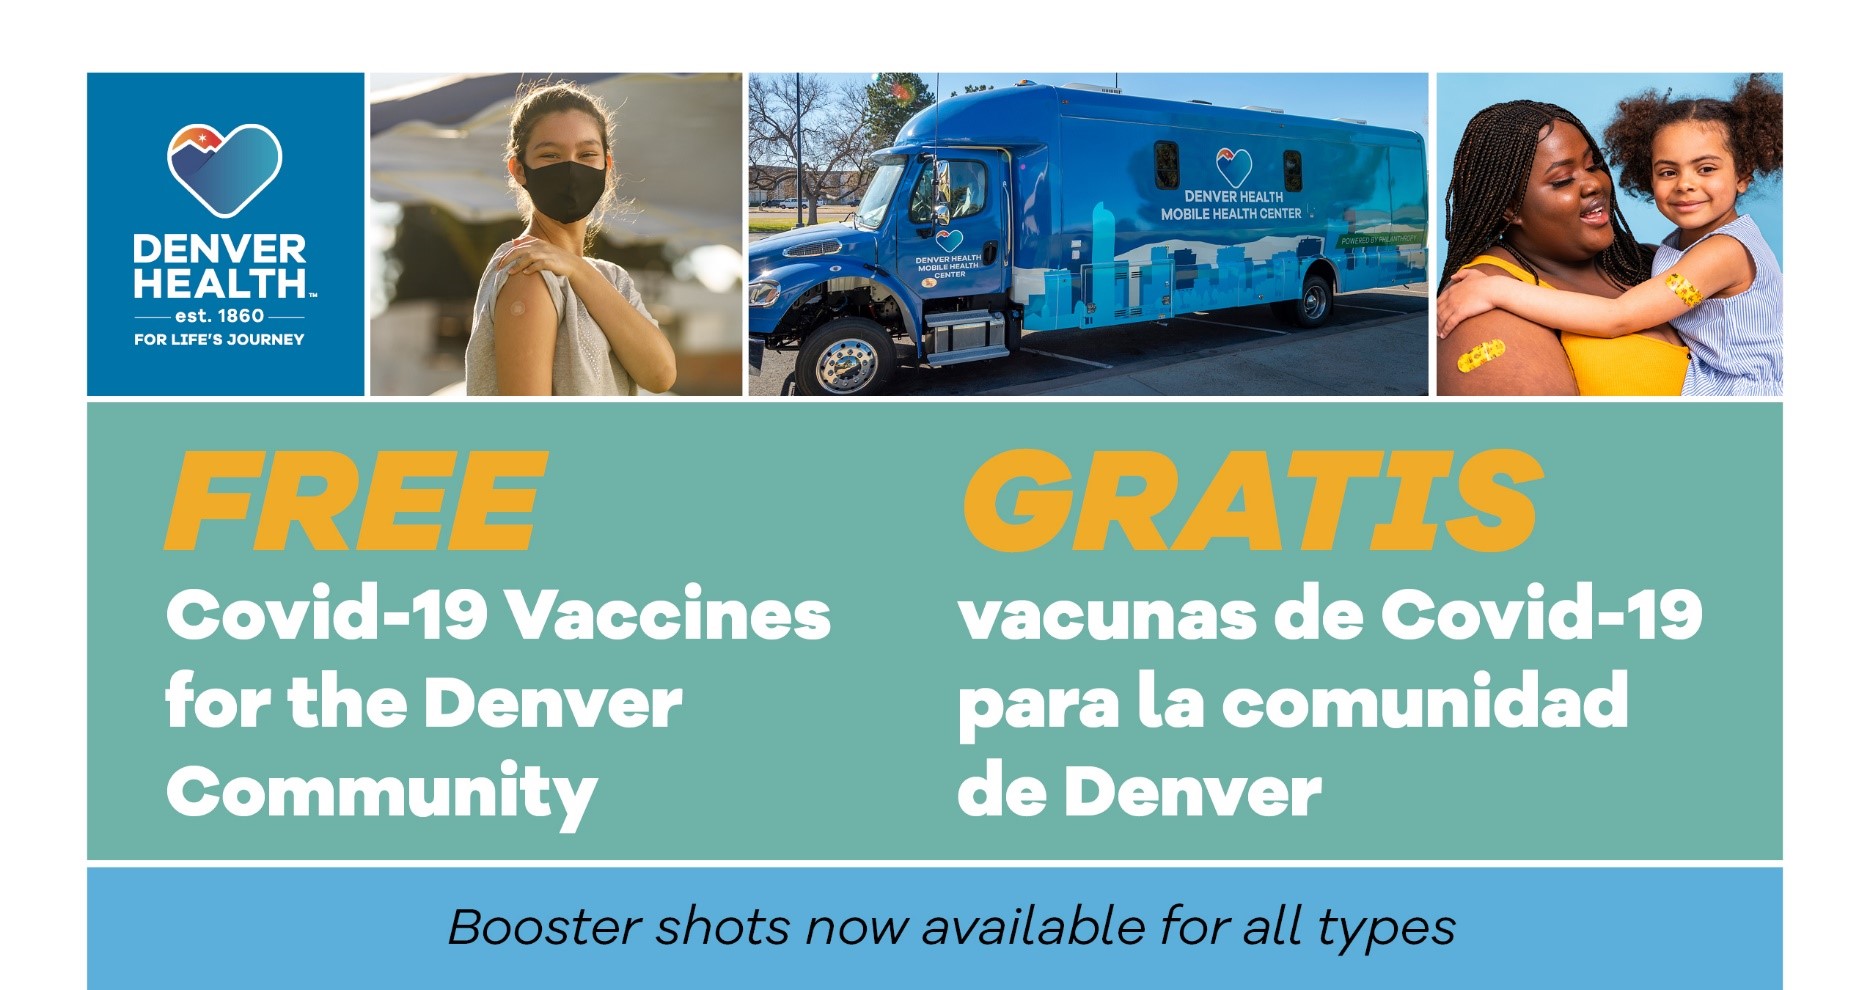 Free Covid Vaccines. No appointment necessary, walk-ups are welcome! Please bring your vaccine card or ID. Please be patient with our staff and wait times. Any questions please email: DHMobileHealthCenters@dhha.org